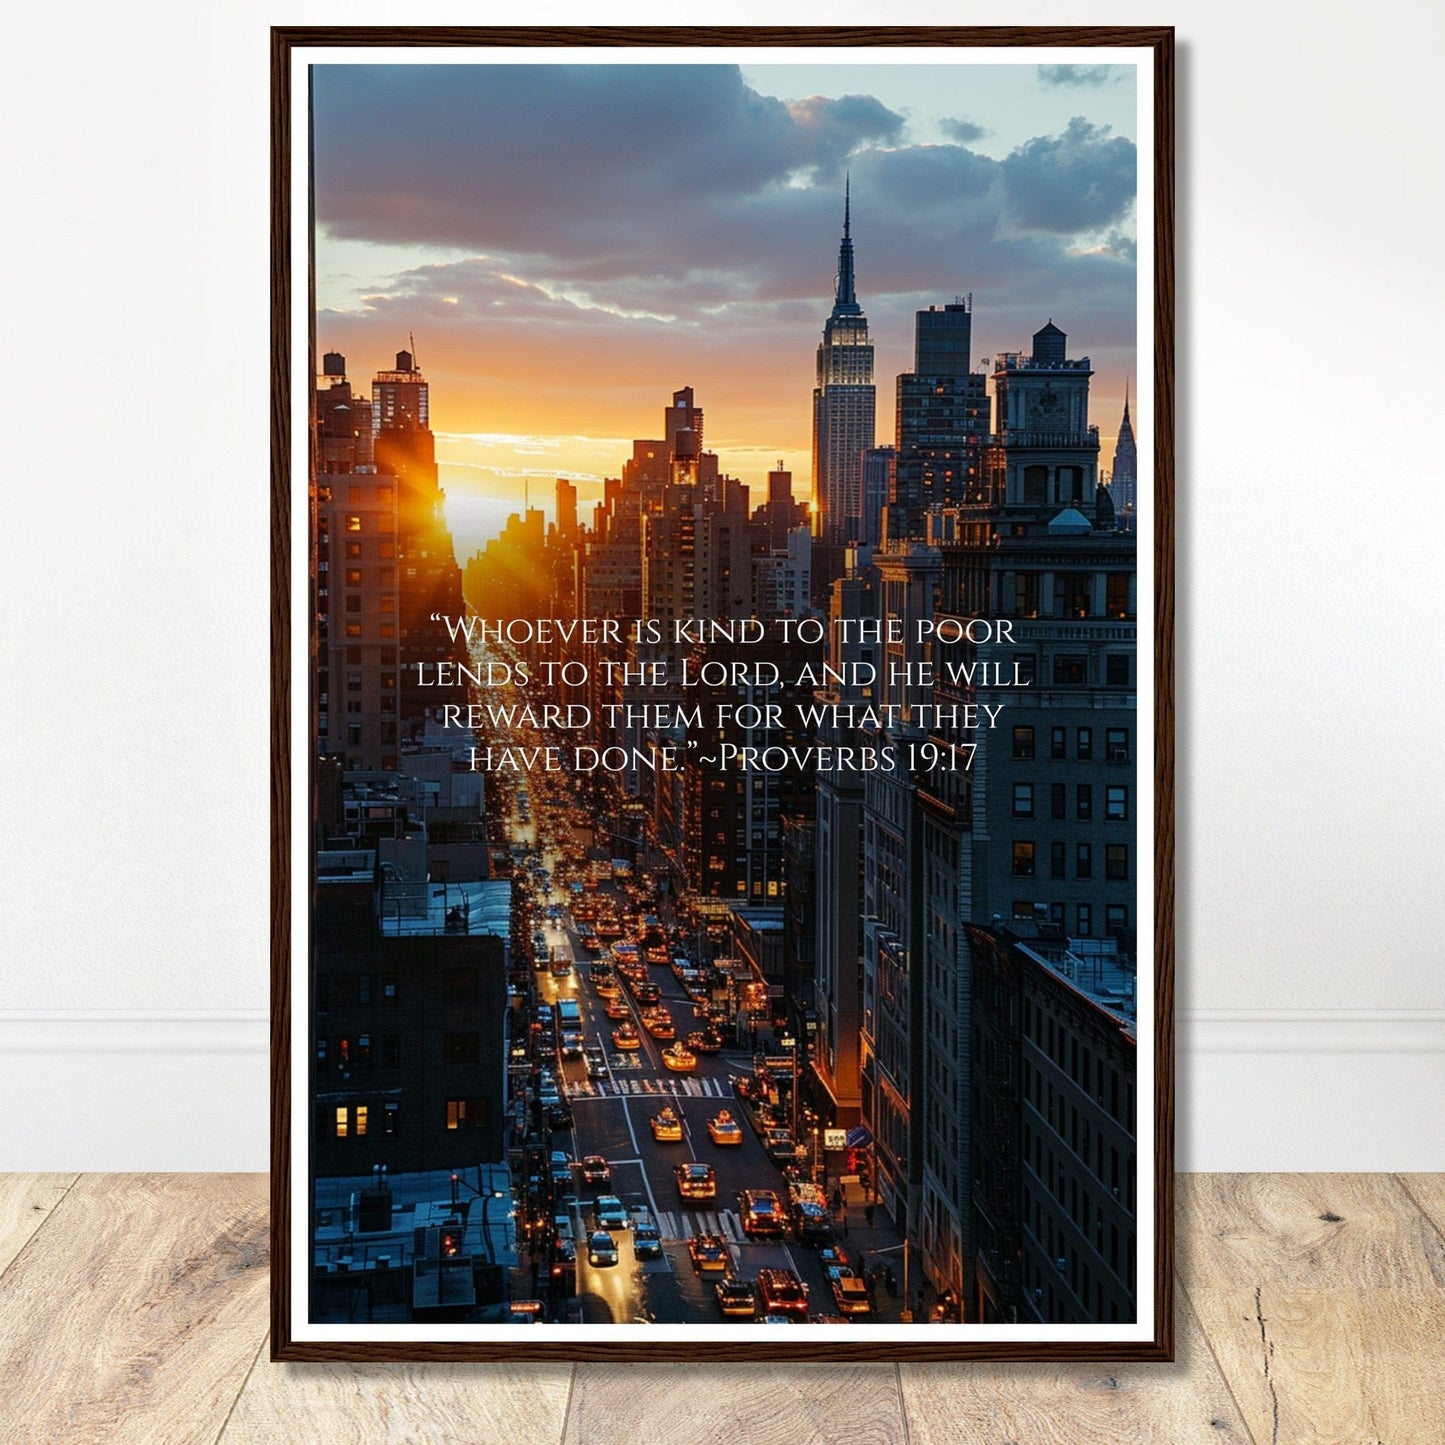 Coffee With My Father Print Material 60x90 cm / 24x36″ / Premium Matte Paper Wooden Framed Poster / Dark wood frame Framed Template